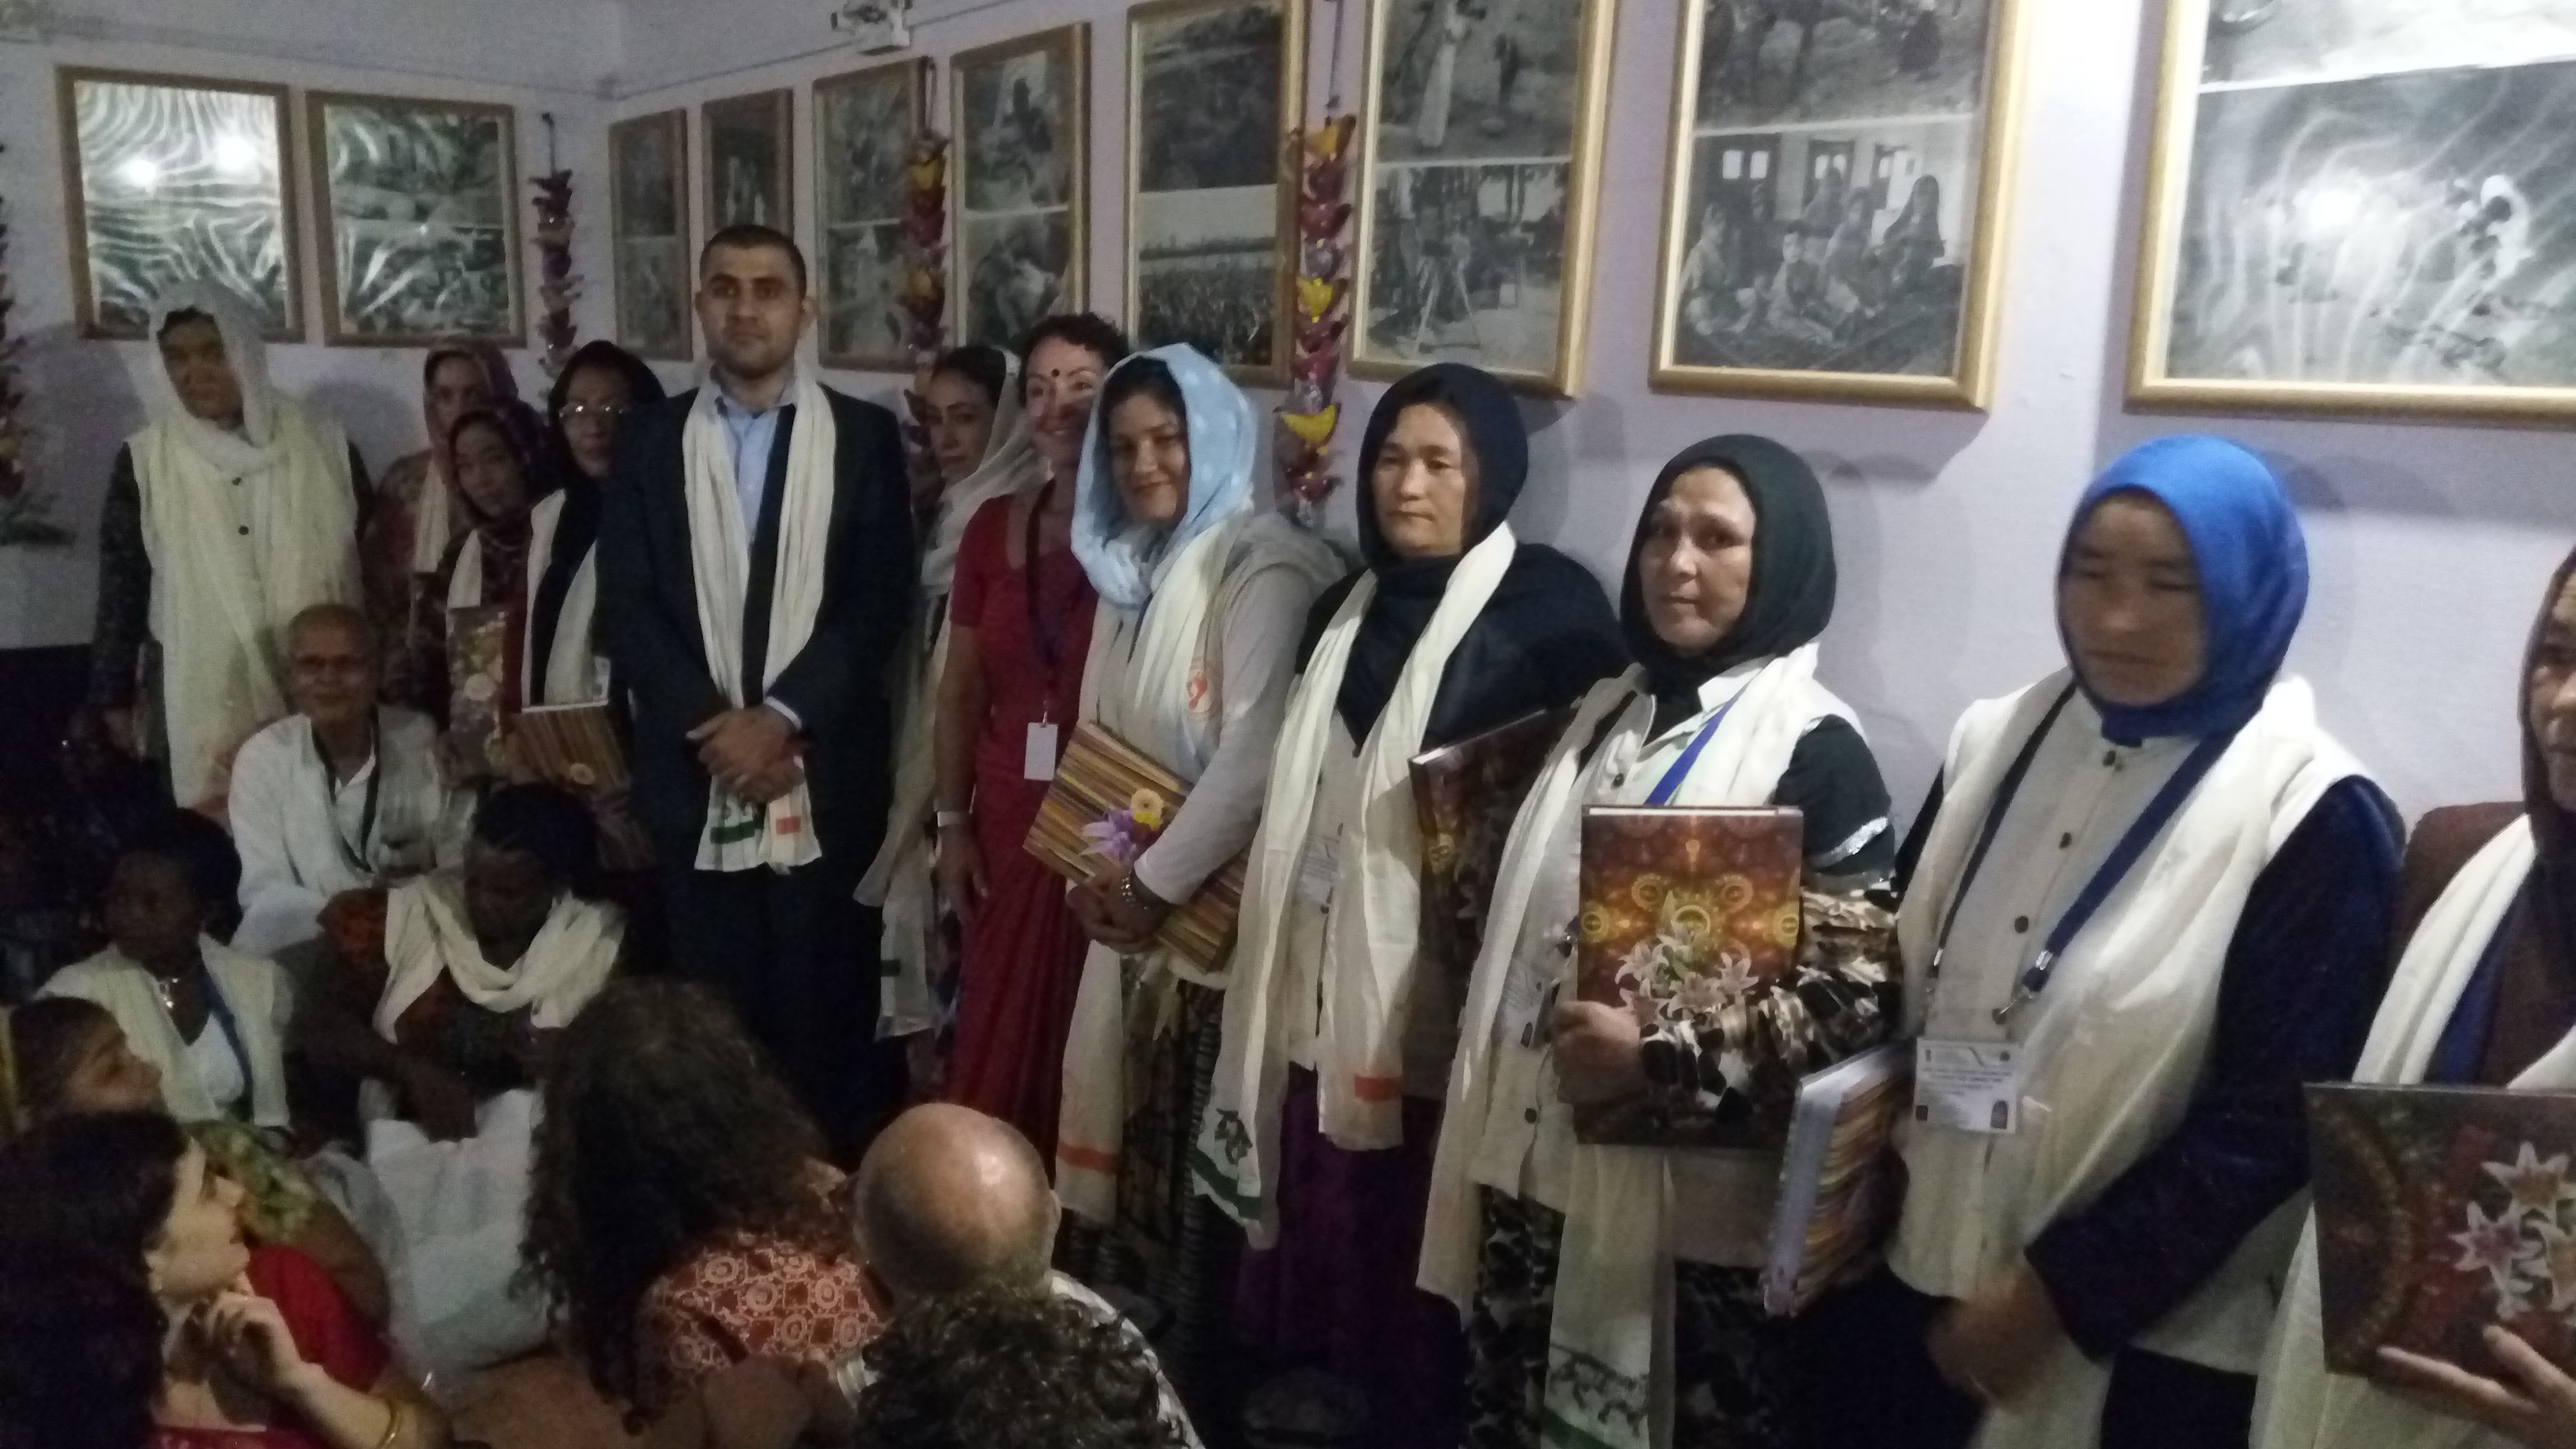 convocation ceremony organised in barefoot college